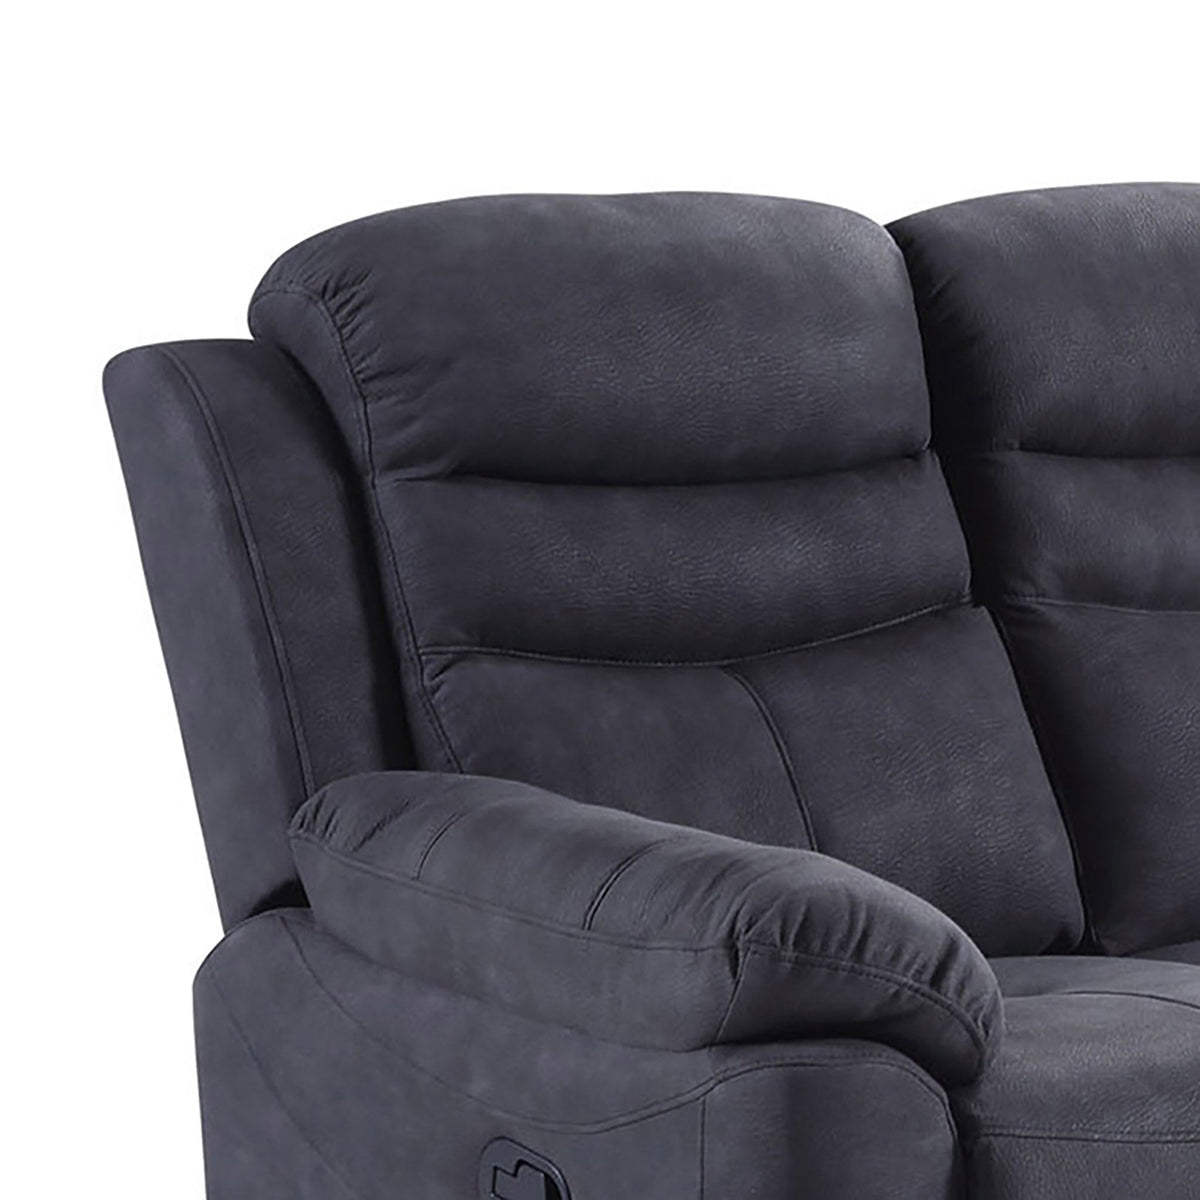 Conway Charcoal 3 Seater Recliner Sofa - Close up of back